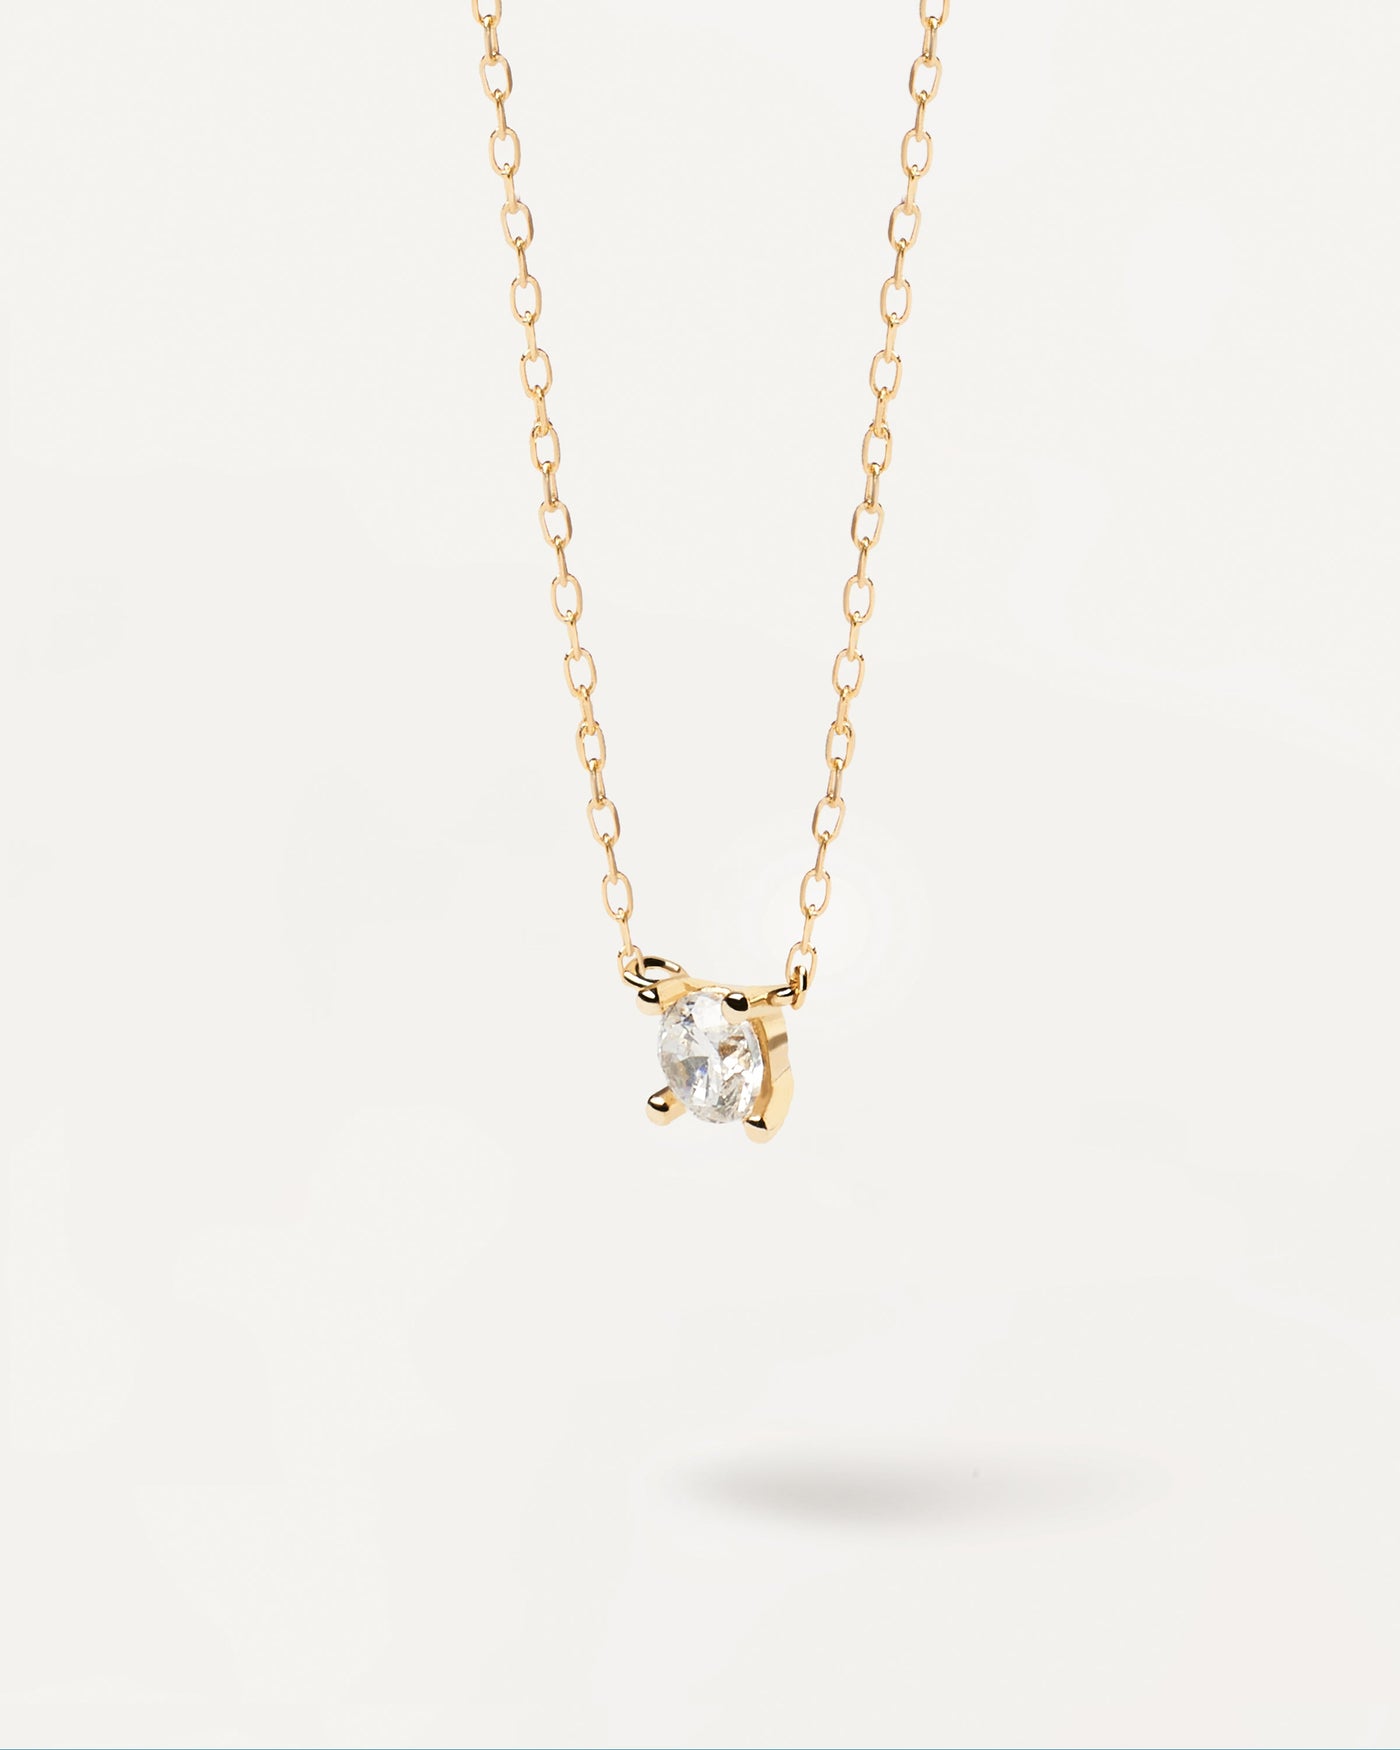 2023 Selection | Diamonds and Gold Solitaire Mini Necklace. Solid yellow gold chain necklace with small round solitary diamond of 0.10 carats. Get the latest arrival from PDPAOLA. Place your order safely and get this Best Seller. Free Shipping.